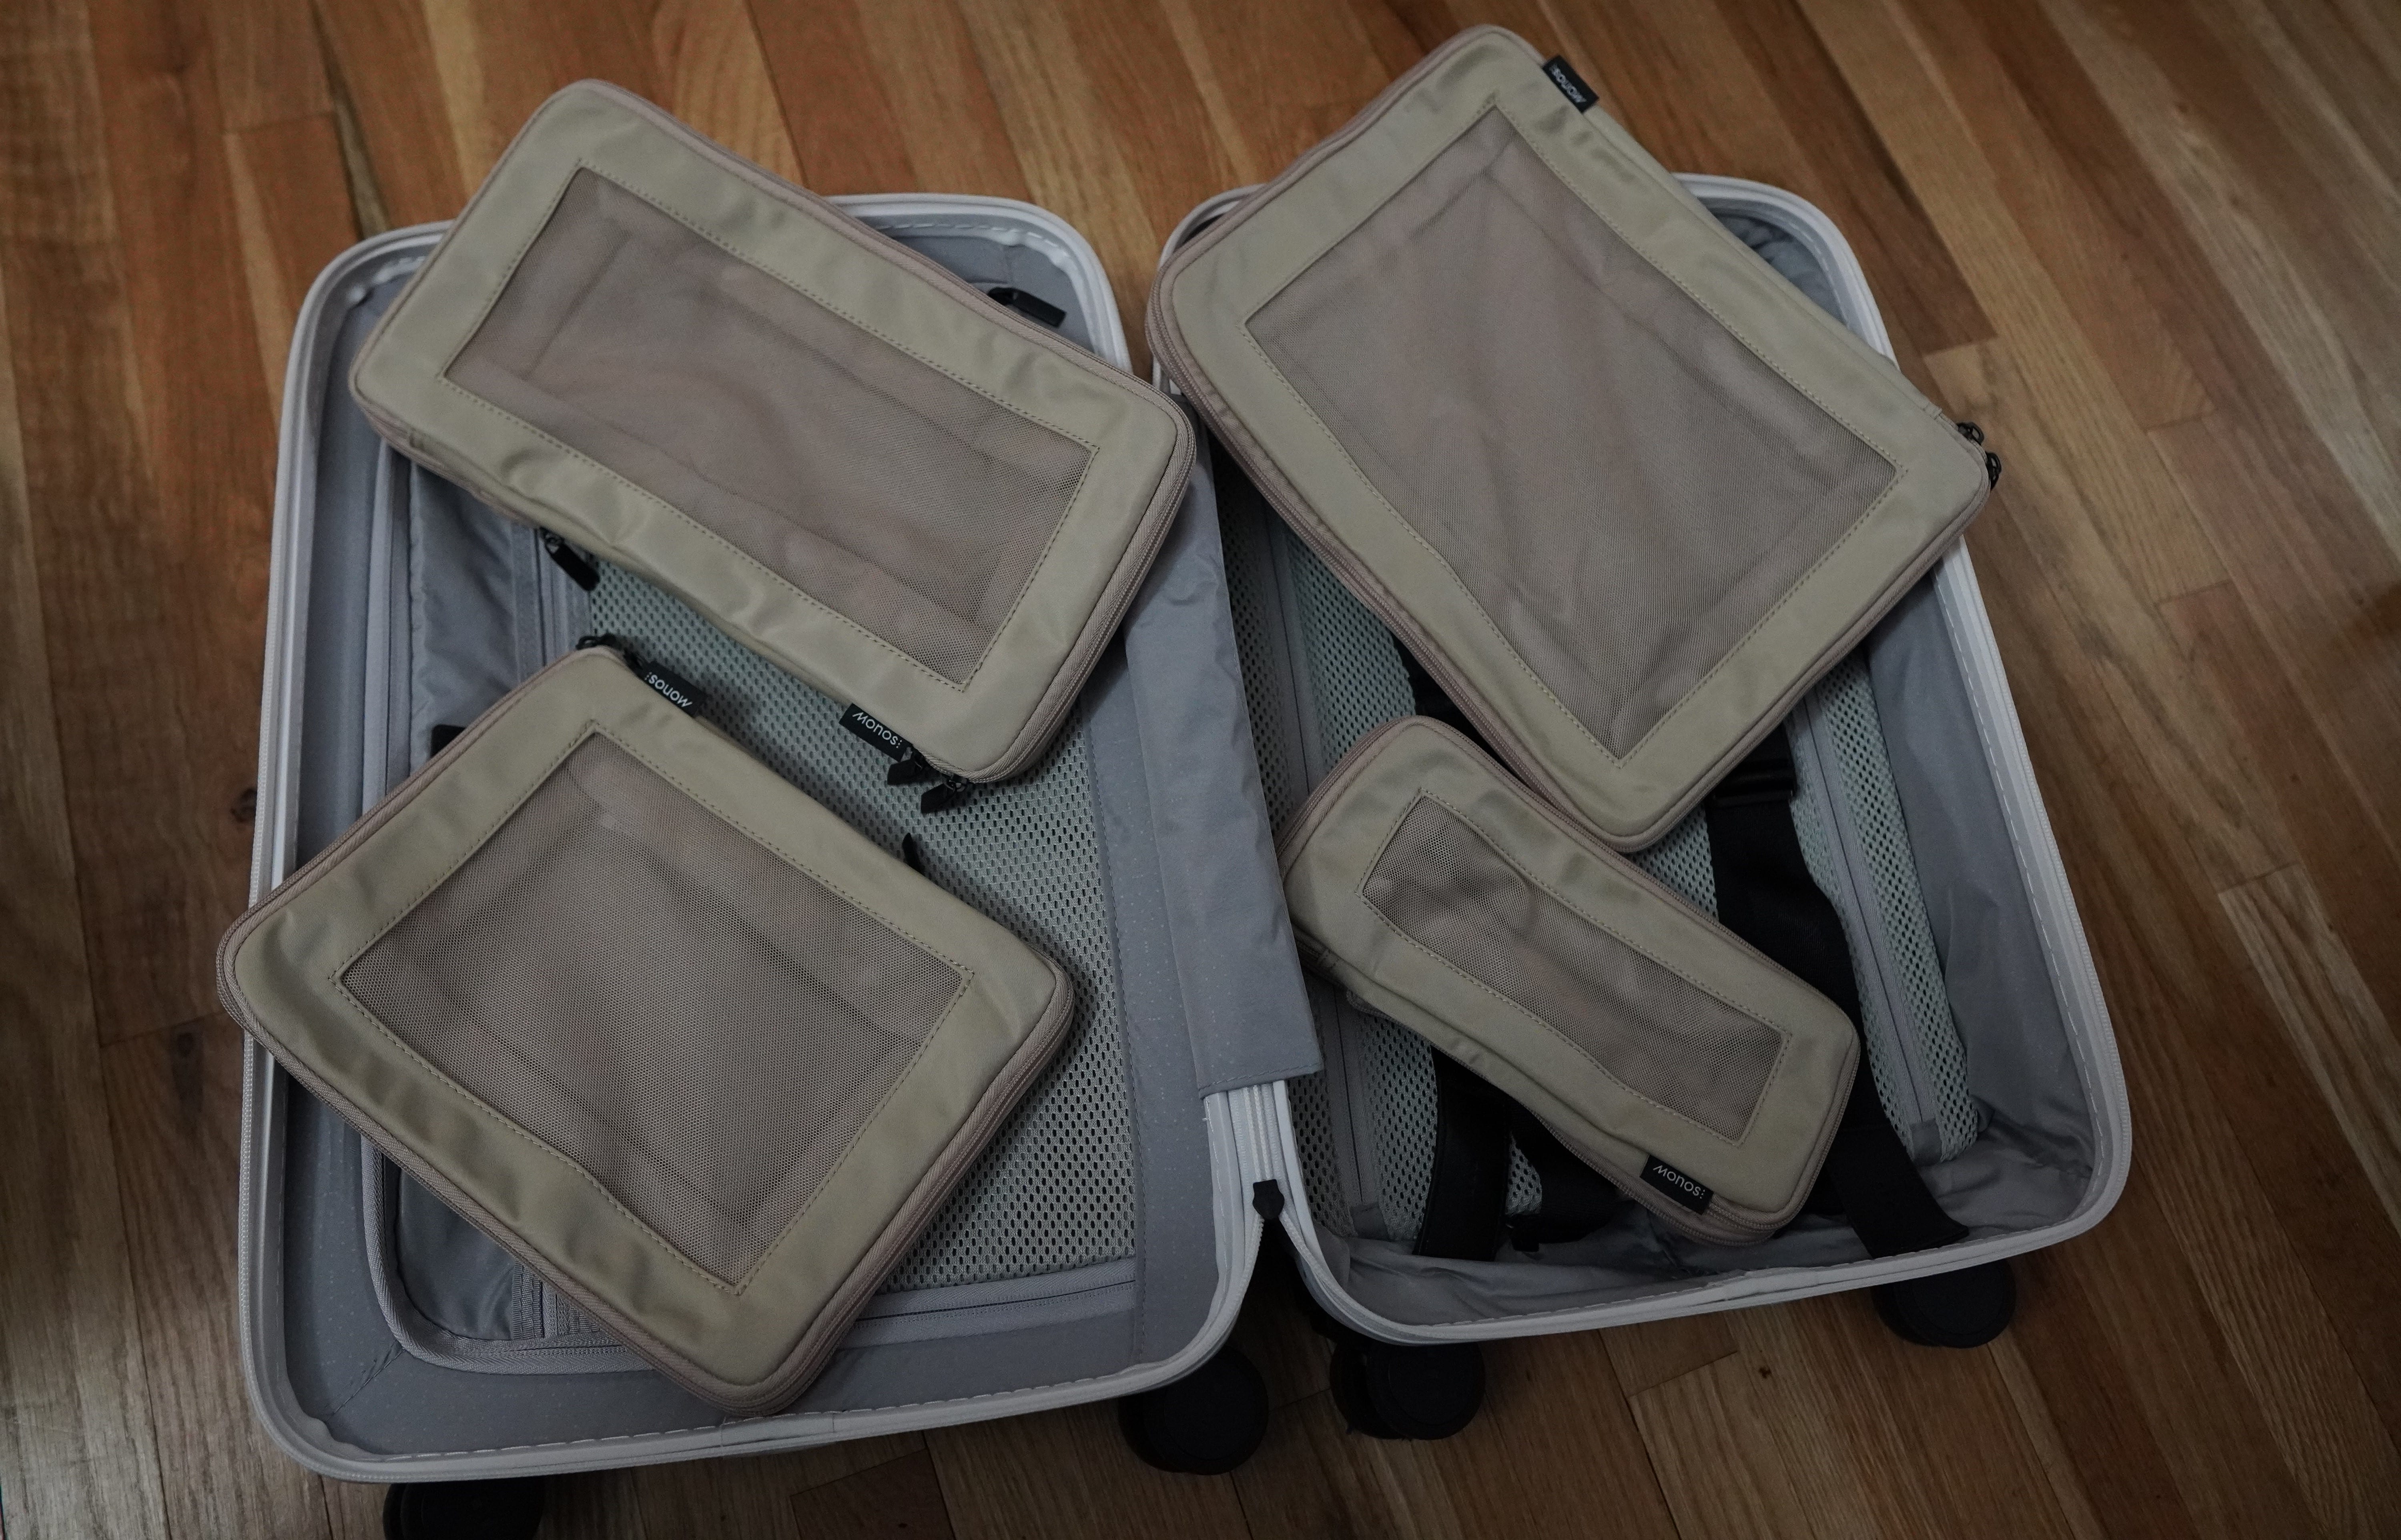 Monos Set of 4 Compressible Packing Cubes in Grey